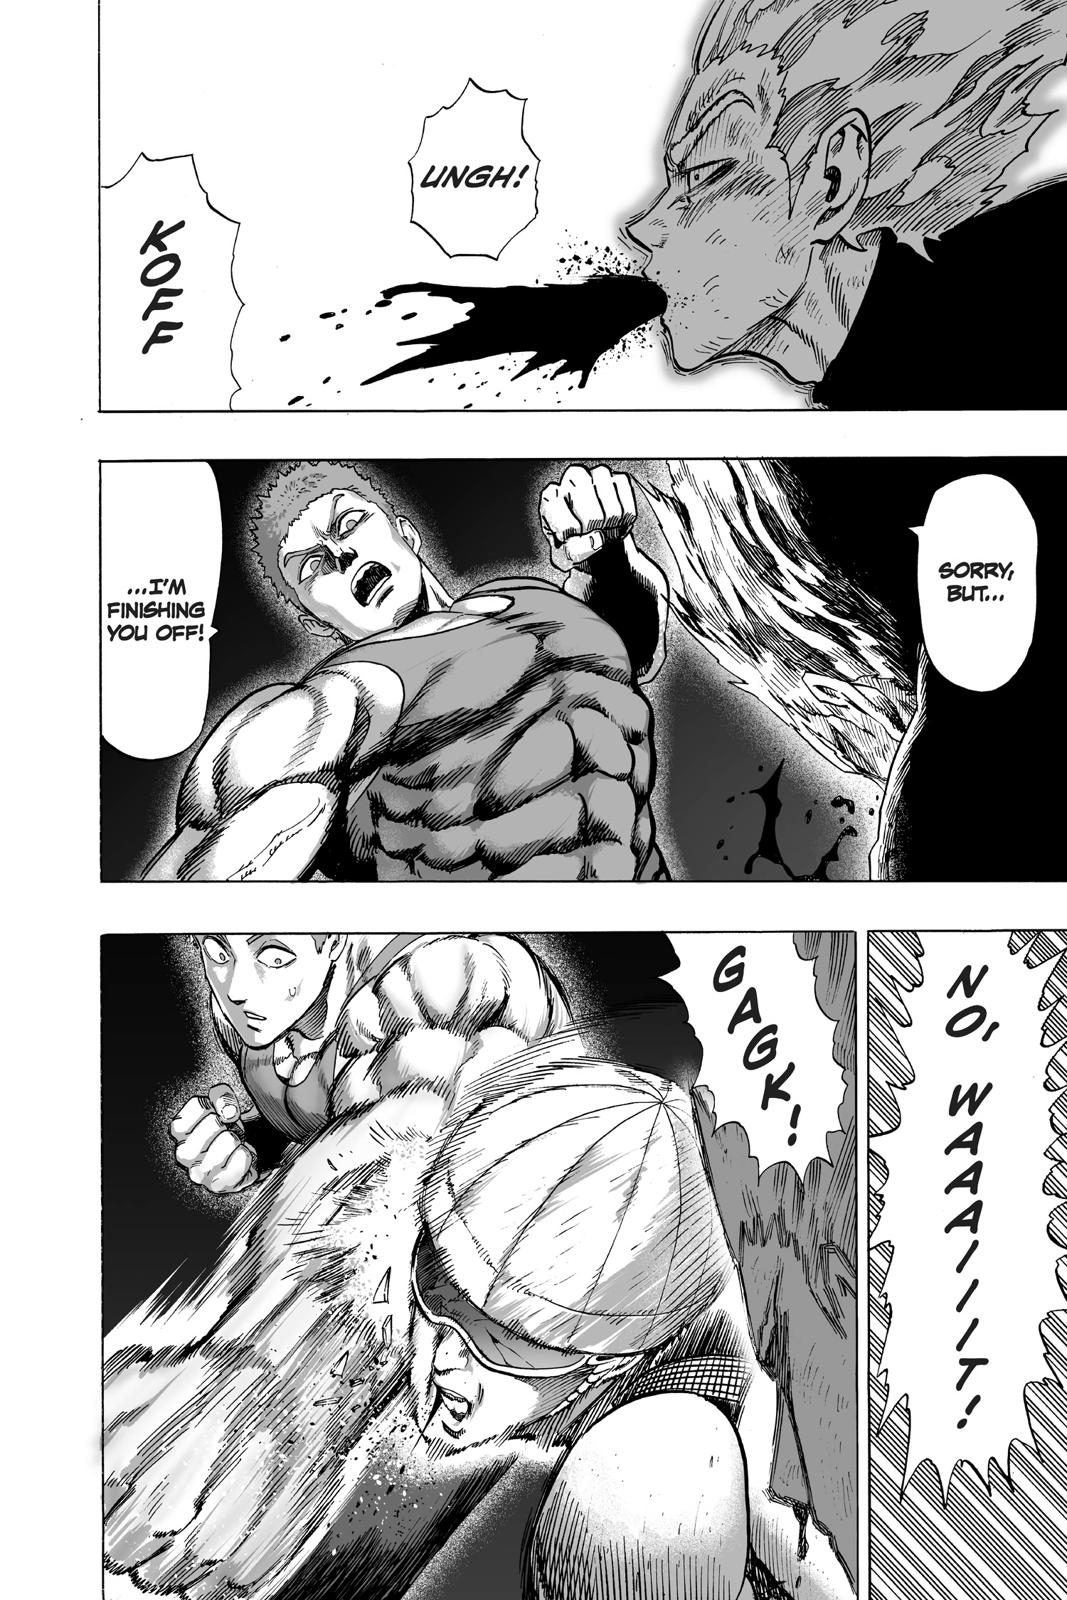 One-Punch Man, Punch 47 image 05